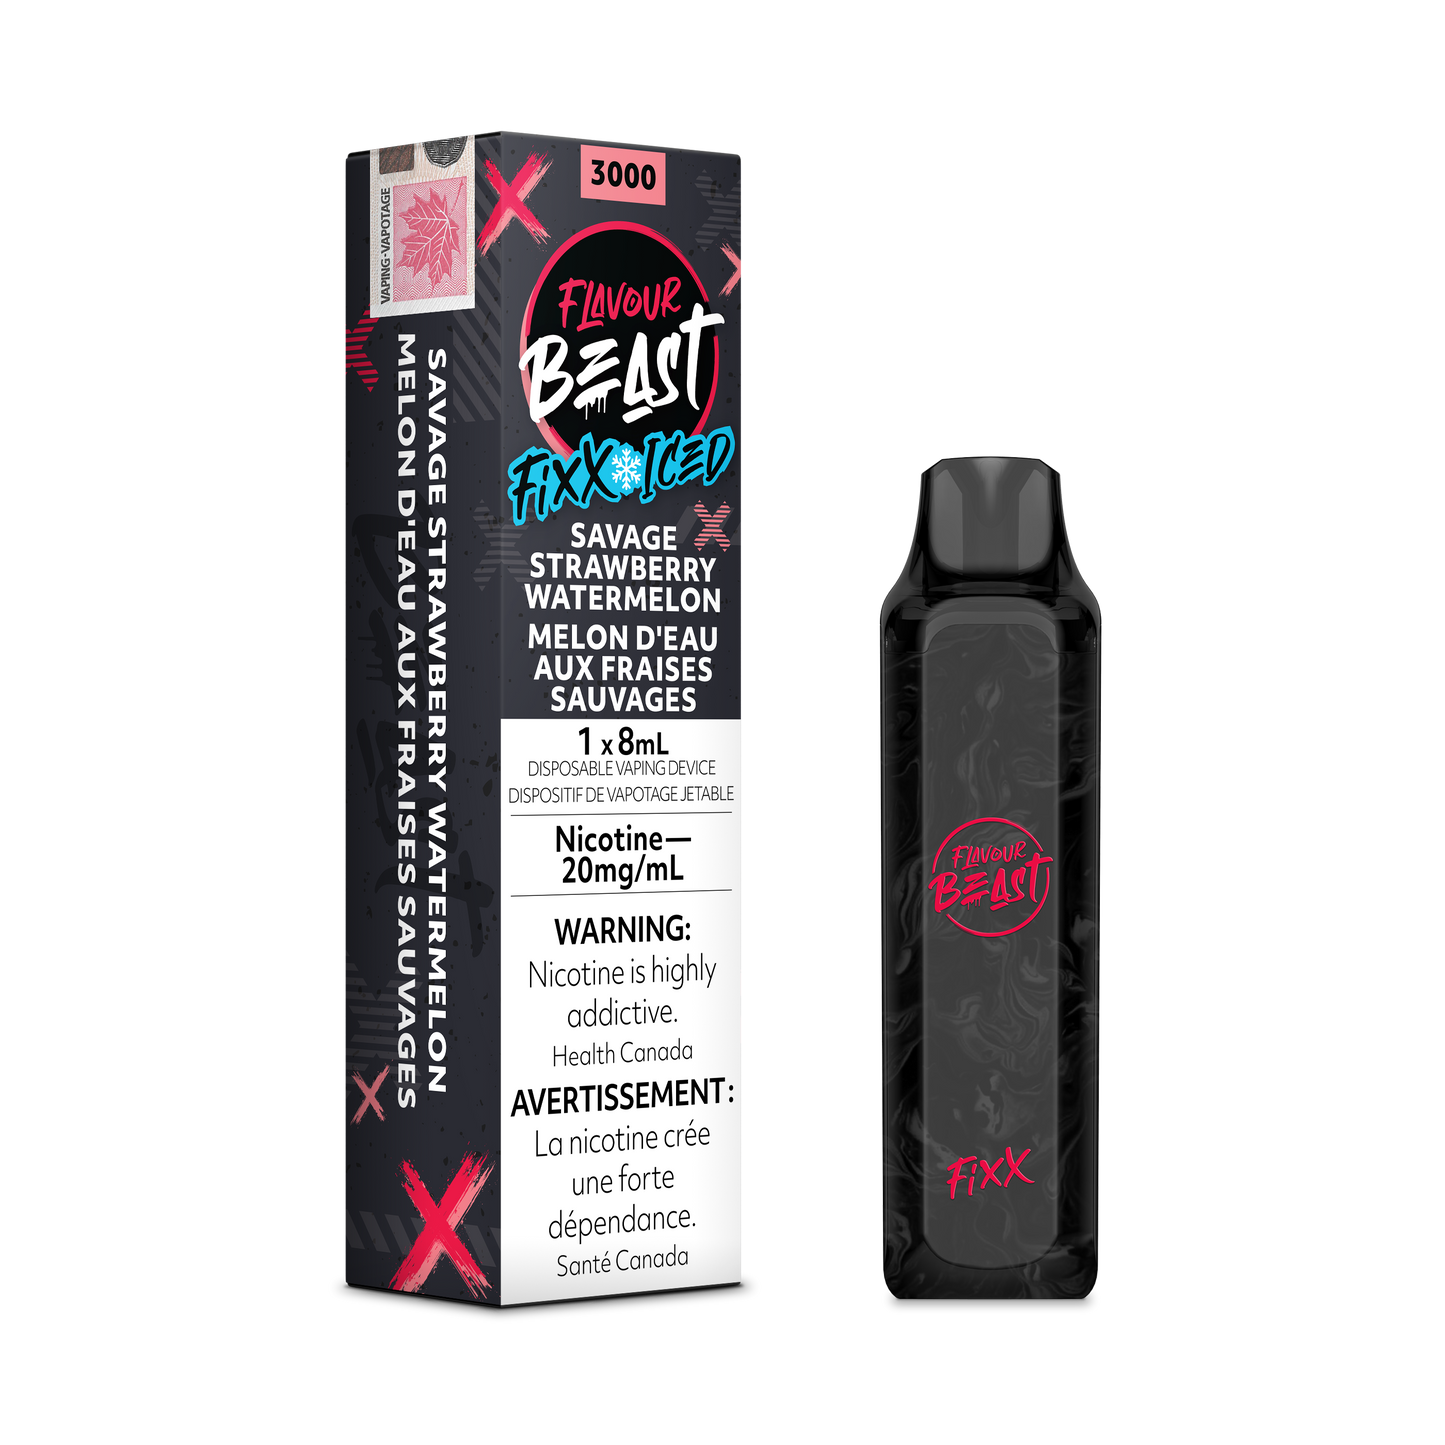 FLAVOUR BEAST FIXX 3000 PUFF DISPOSABLE